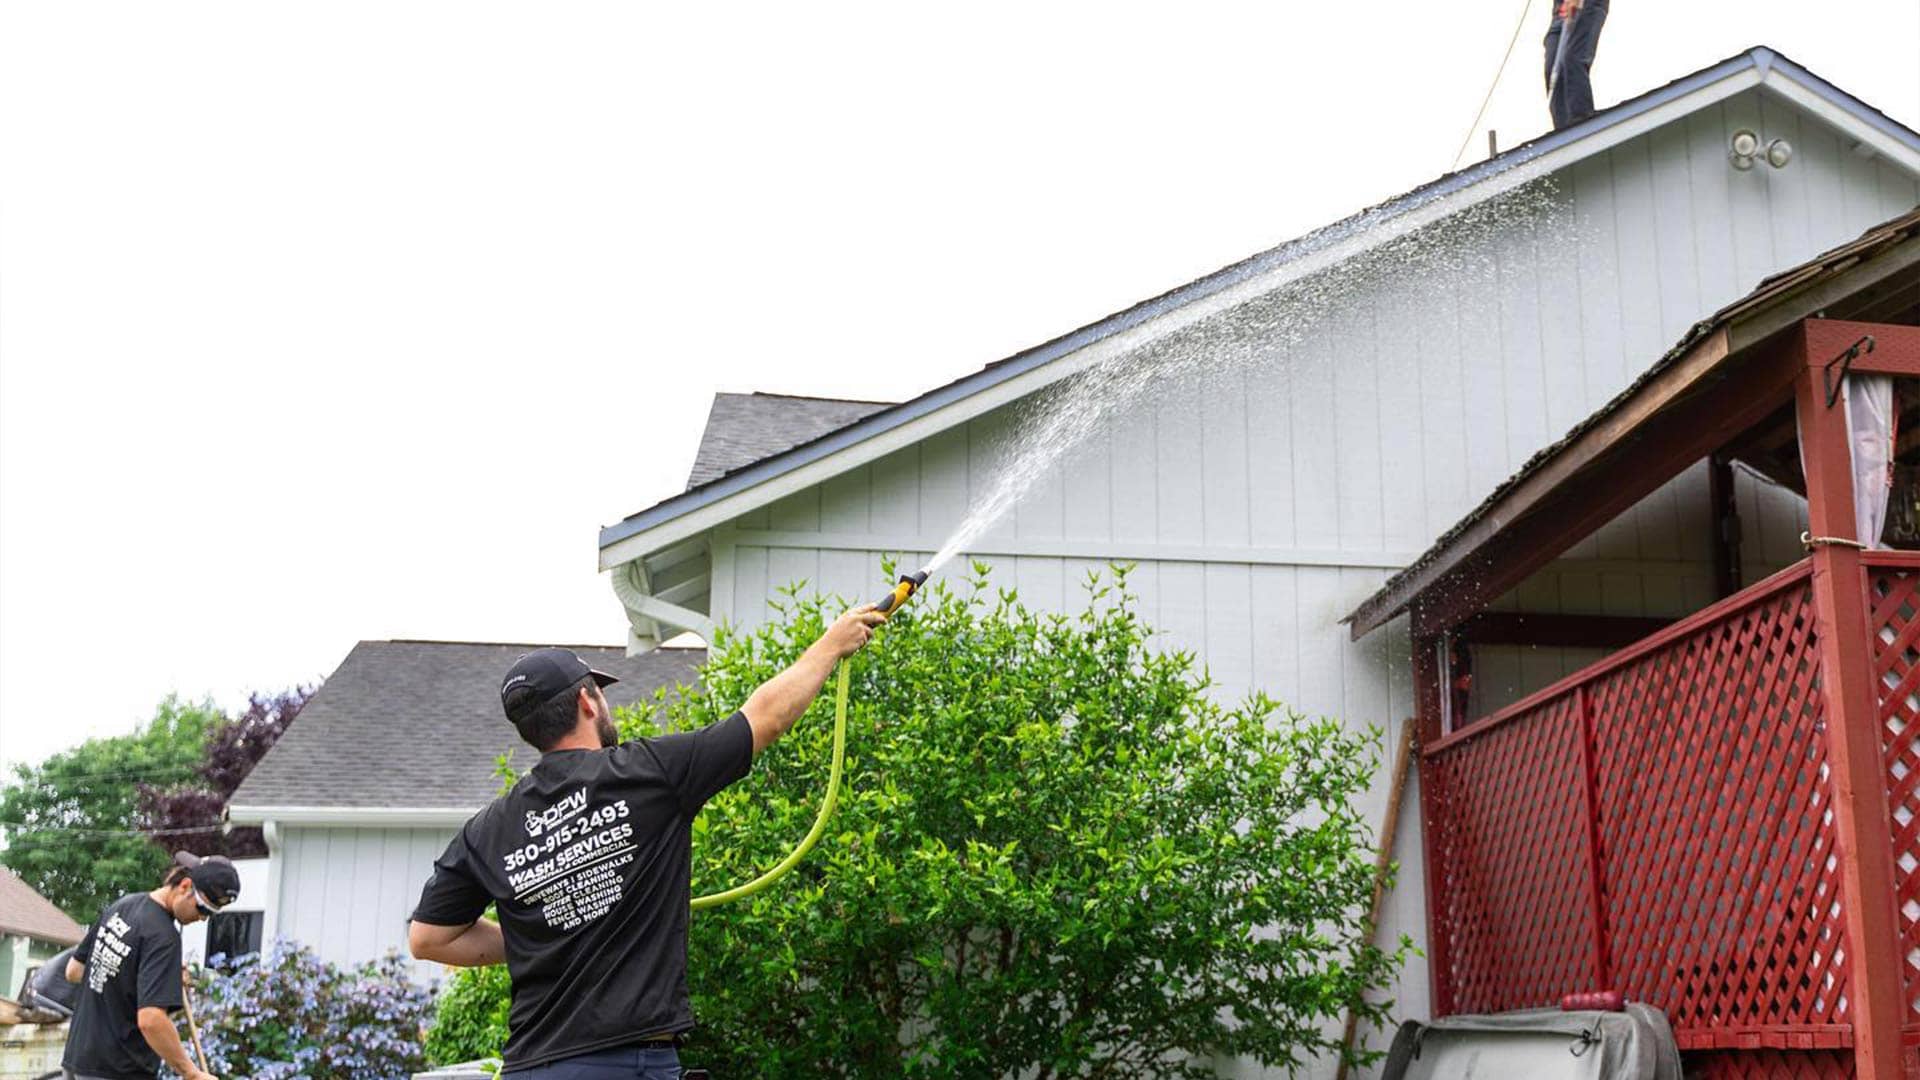 Residential Pressure Washing Services